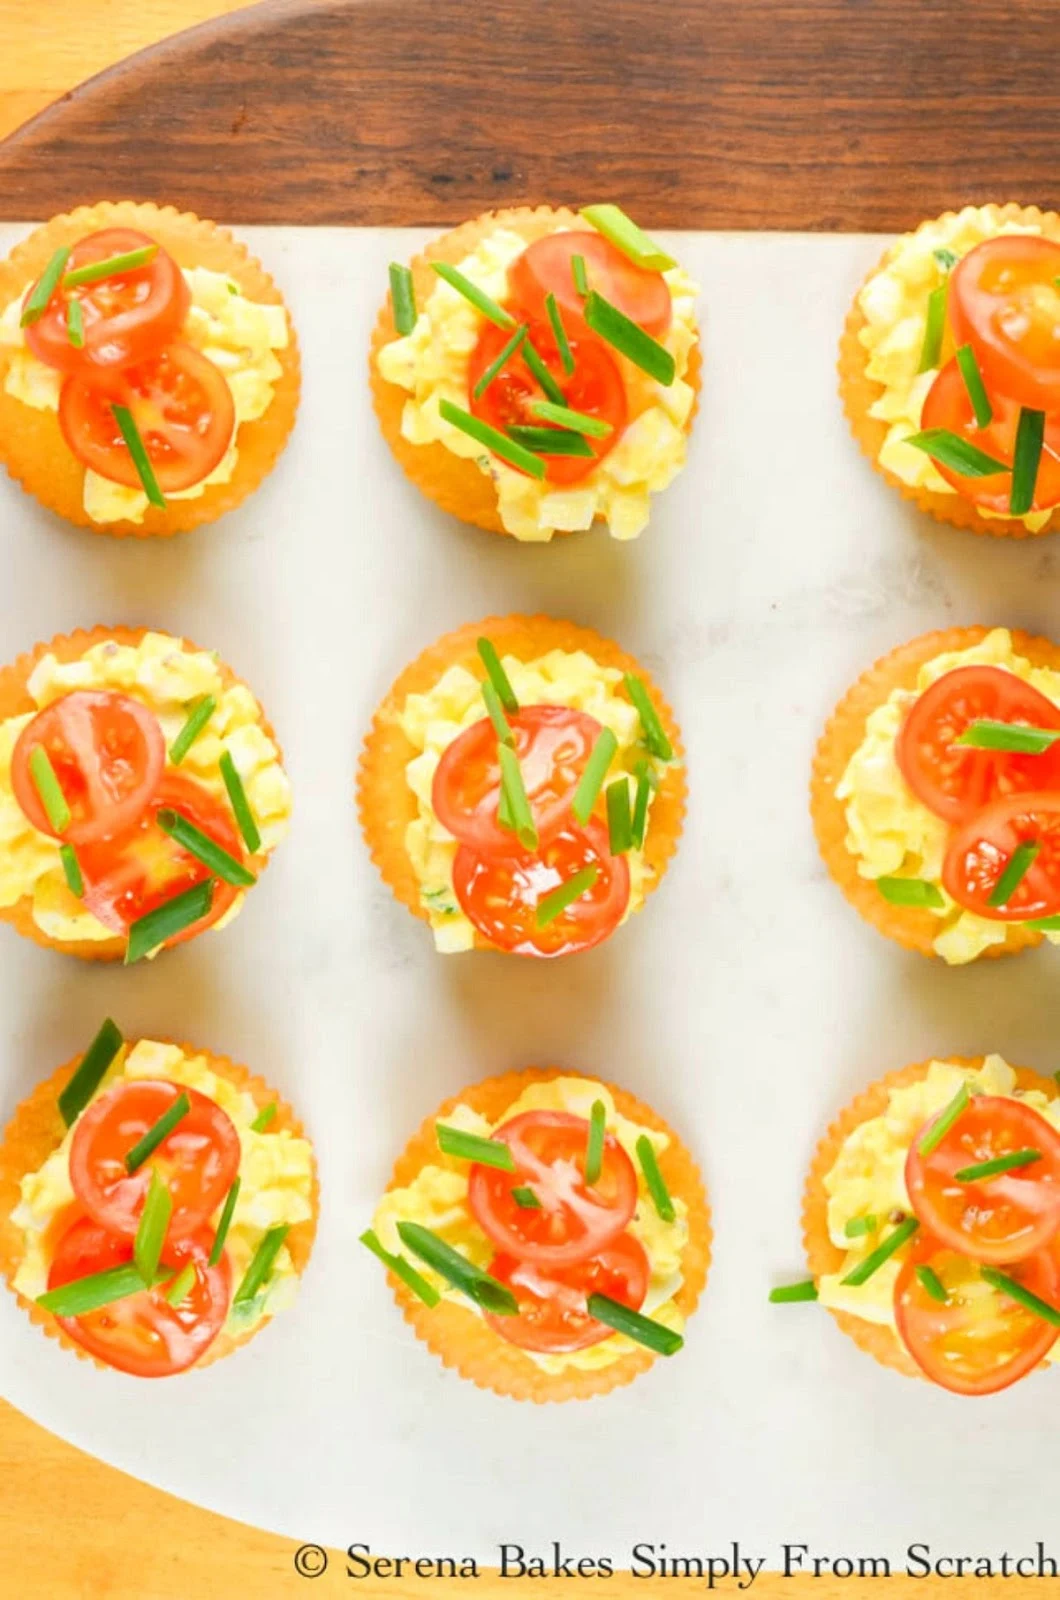 The best Egg Salad recipe on crackers with a slice or tomato and chive is perfect for an easy appetizer or light lunch. It also makes a delicious Egg Salad Sandwich from Serena Bakes Simply From Scratch.